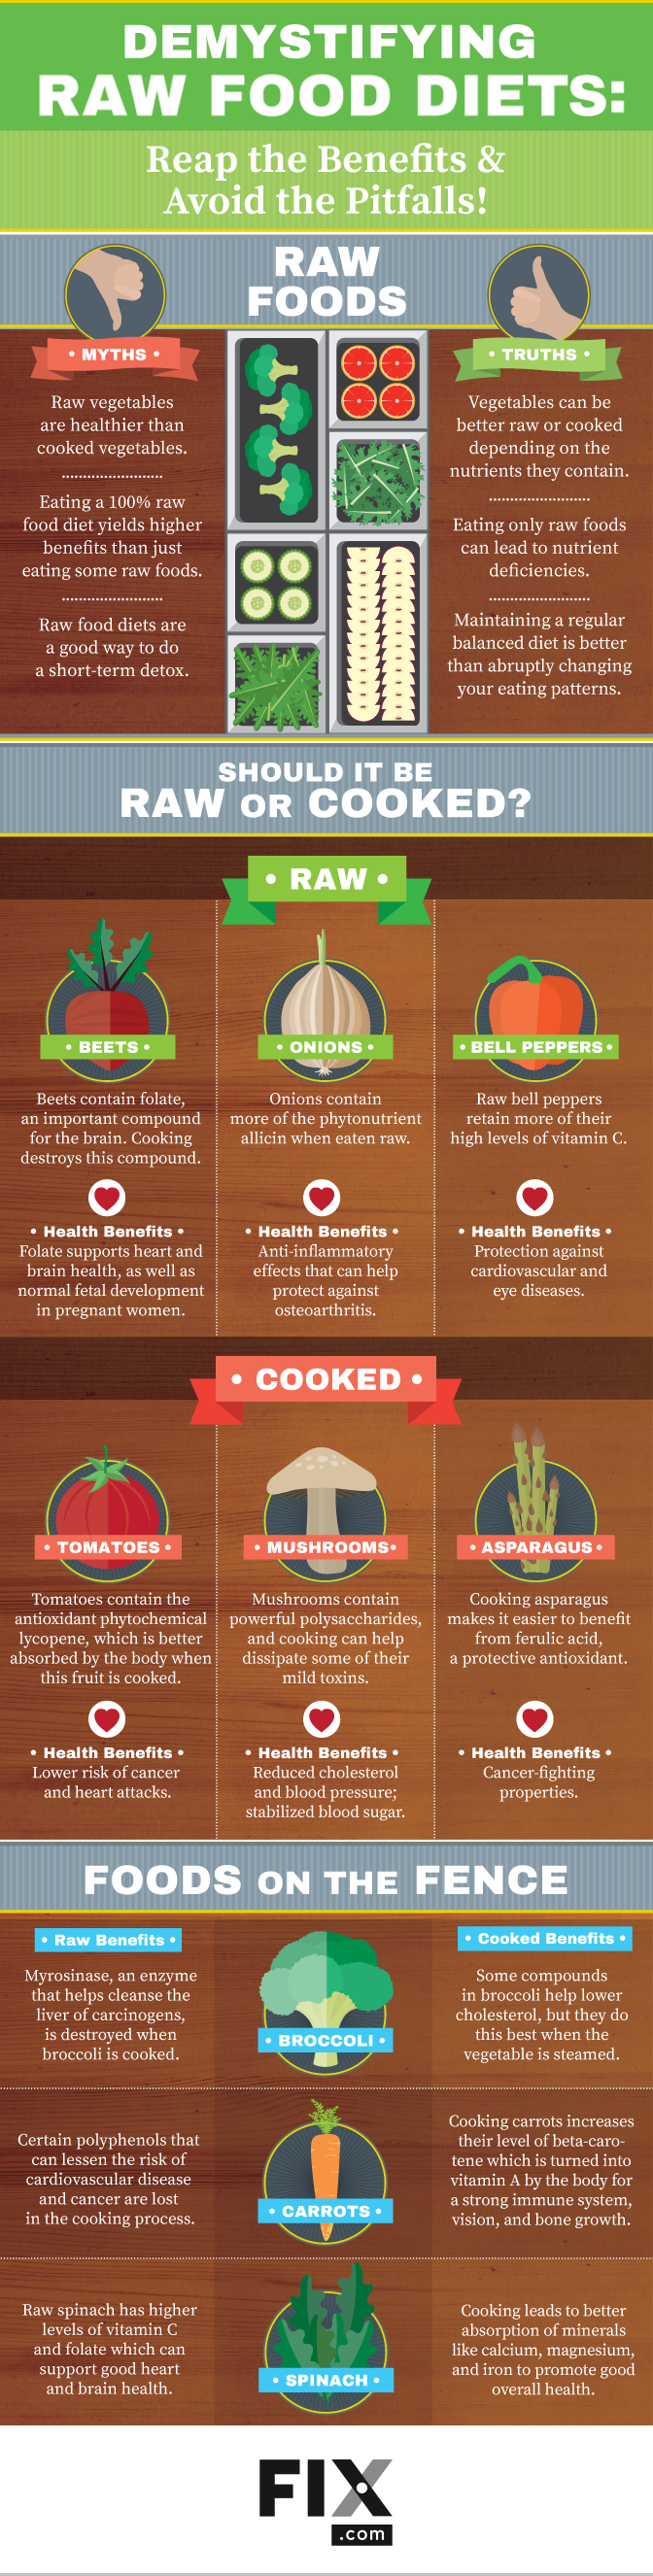 Demystifying Raw Food Diets Reap the Benefits and Avoid the Pitfalls #infographic